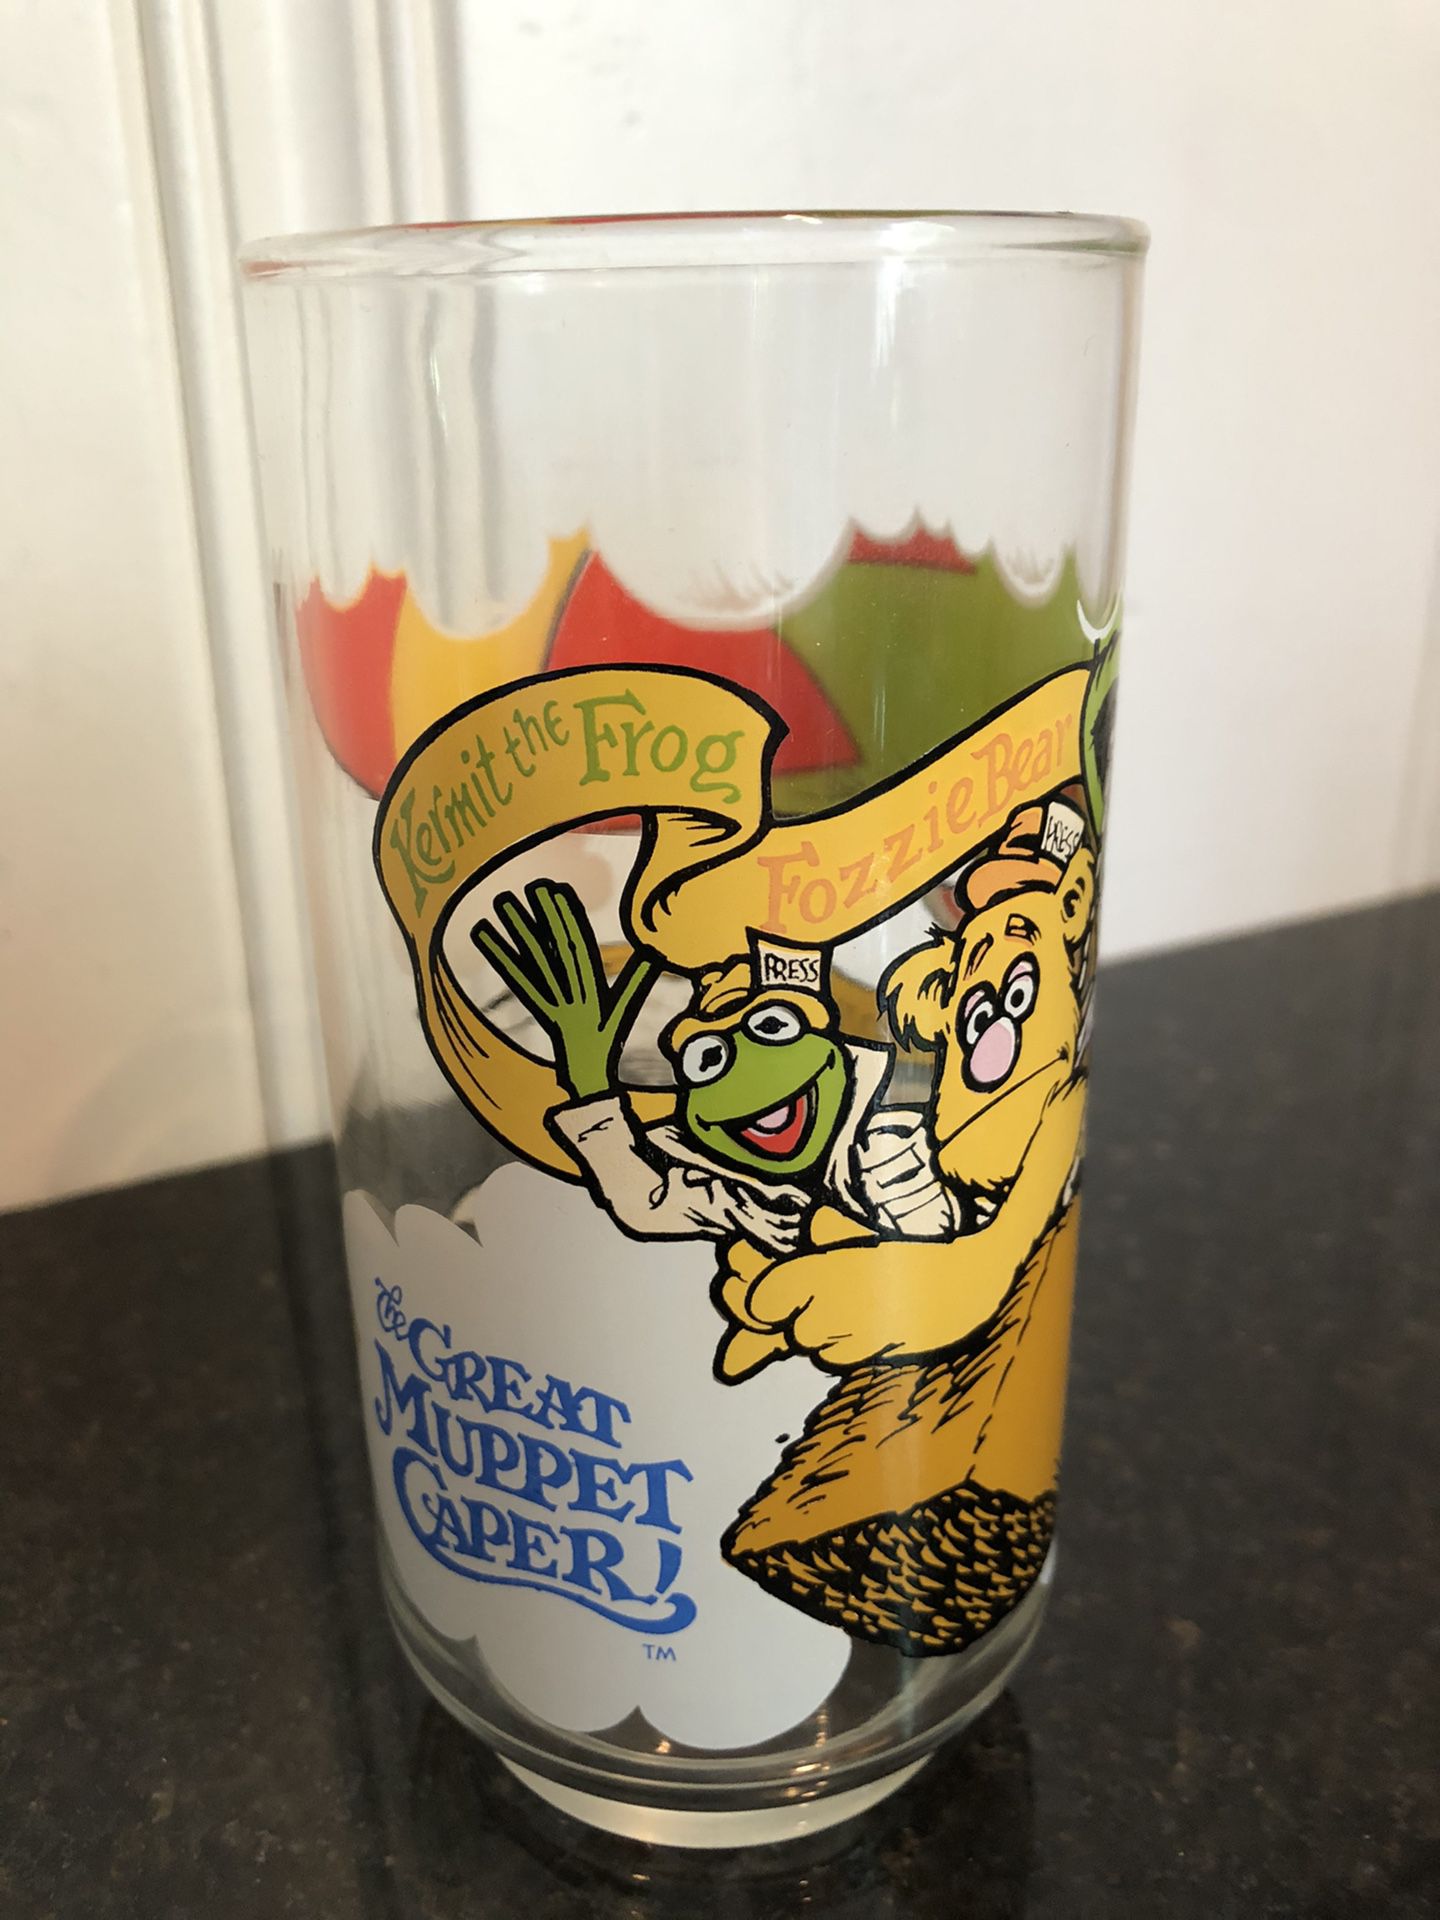 Muppets collectible glass from McDonald’s